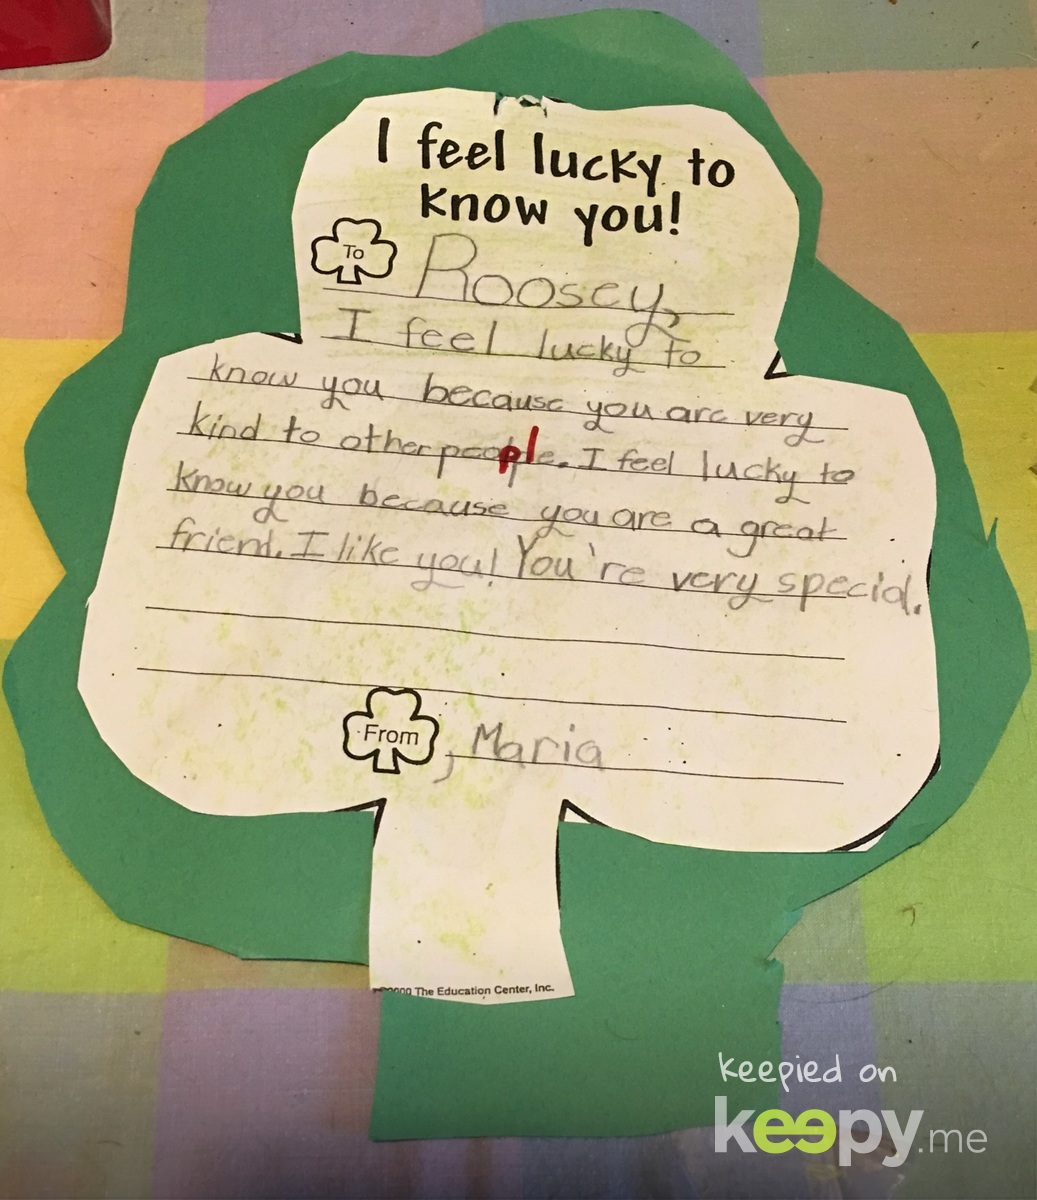 Maria’s St. Patrick’s Day note to #RoslynJ